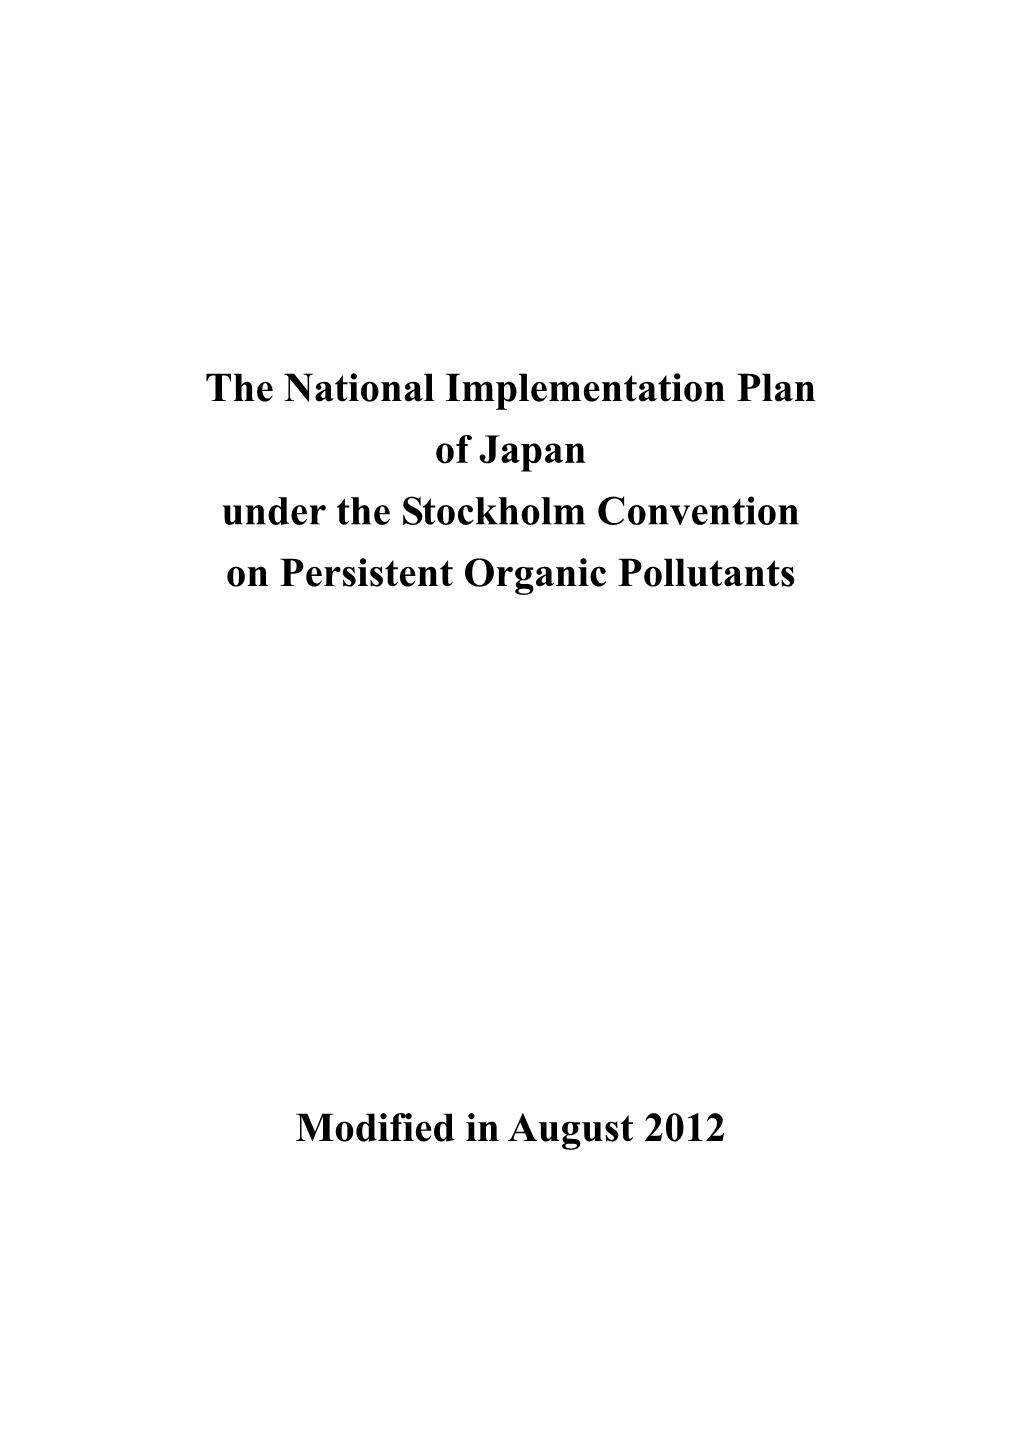 The National Implementation Plan of Japan Under the Stockholm Convention on Persistent Organic Pollutants